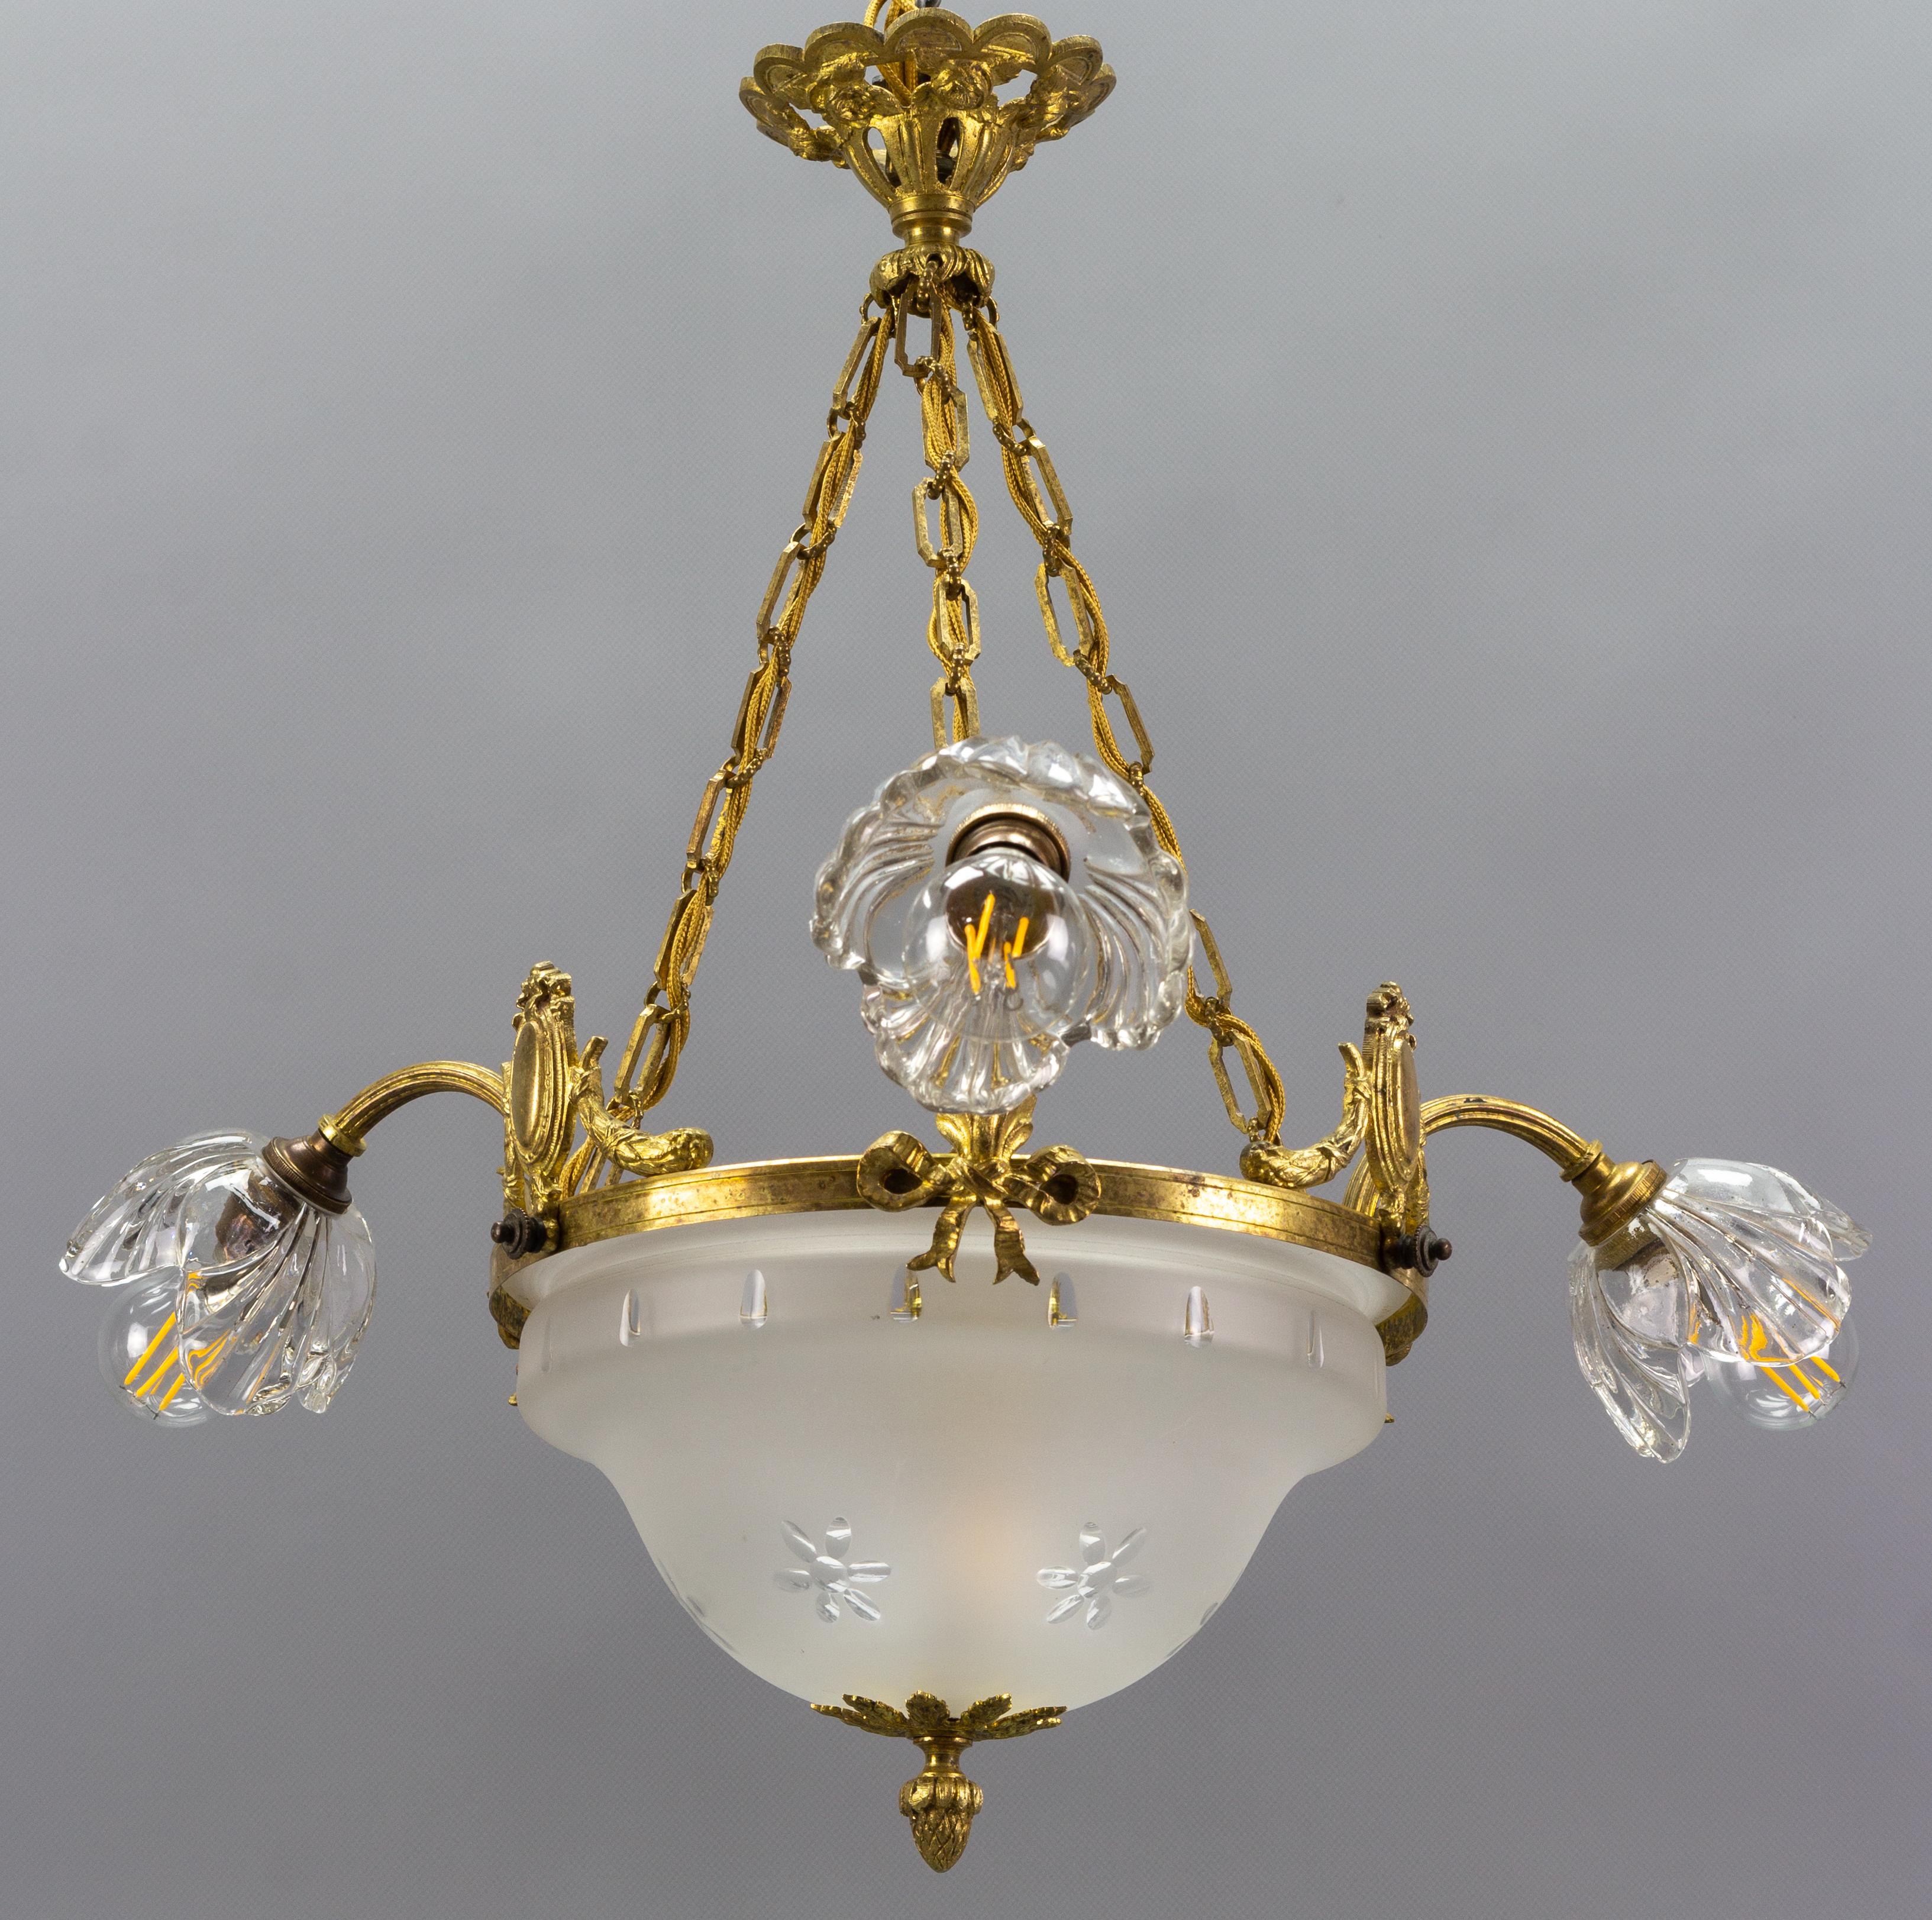 French neoclassical style gilt bronze and glass four-light chandelier. This beautiful chandelier features three arms each terminating in a flower-shaped clear glass lampshade and a beautifully shaped cut frosted central glass shade ending with an